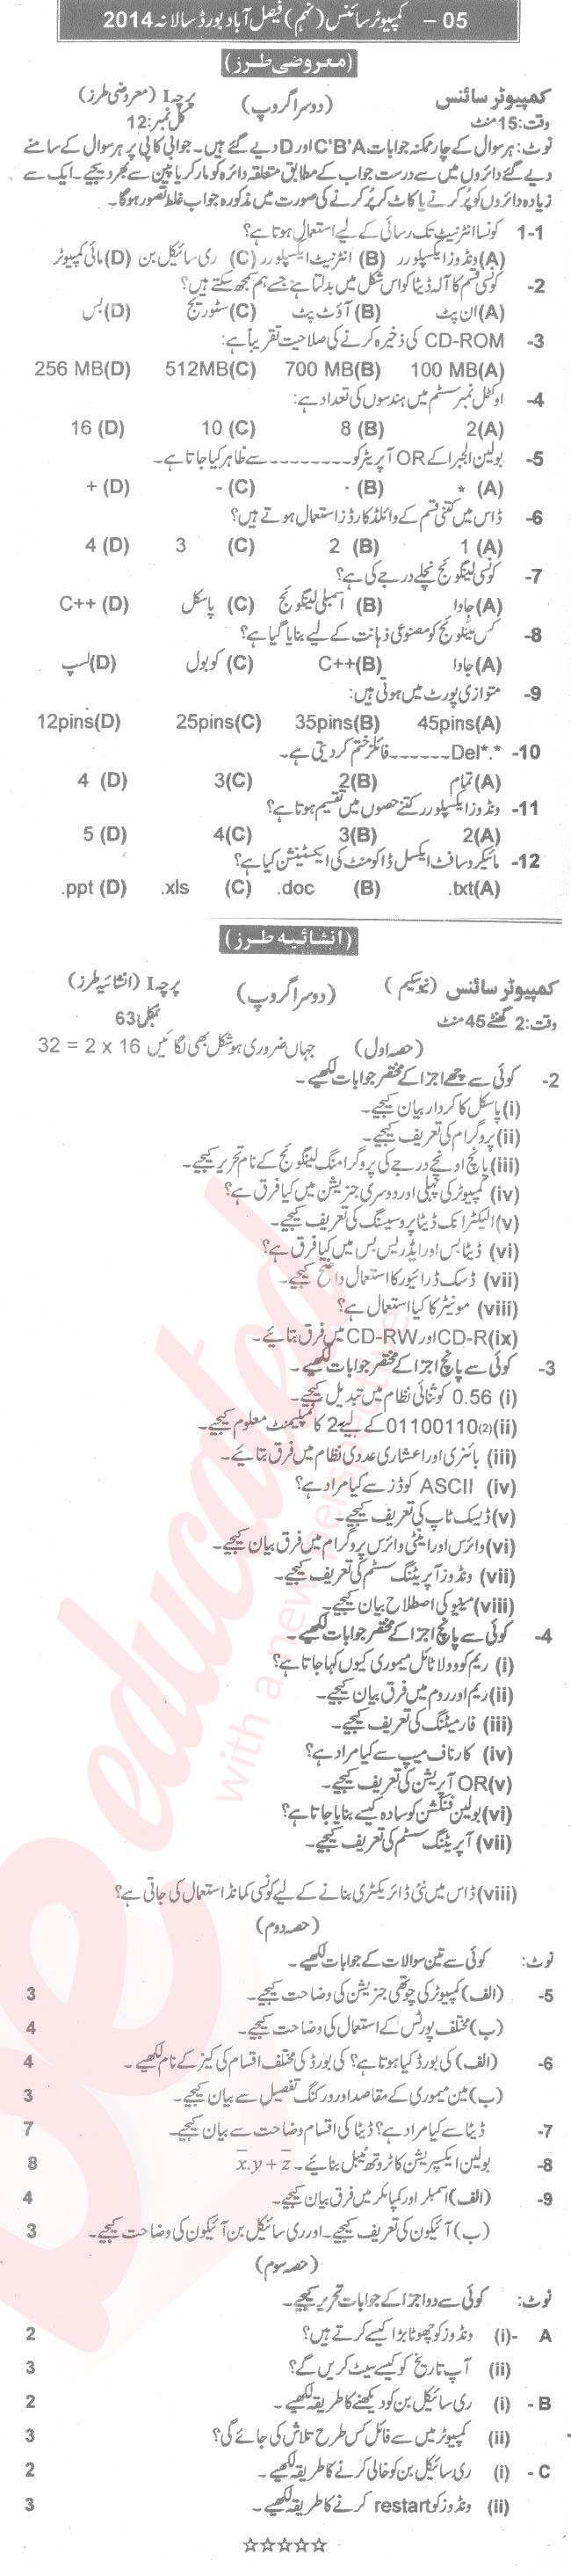 Computer Science 9th class Past Paper Group 2 BISE Faisalabad 2014